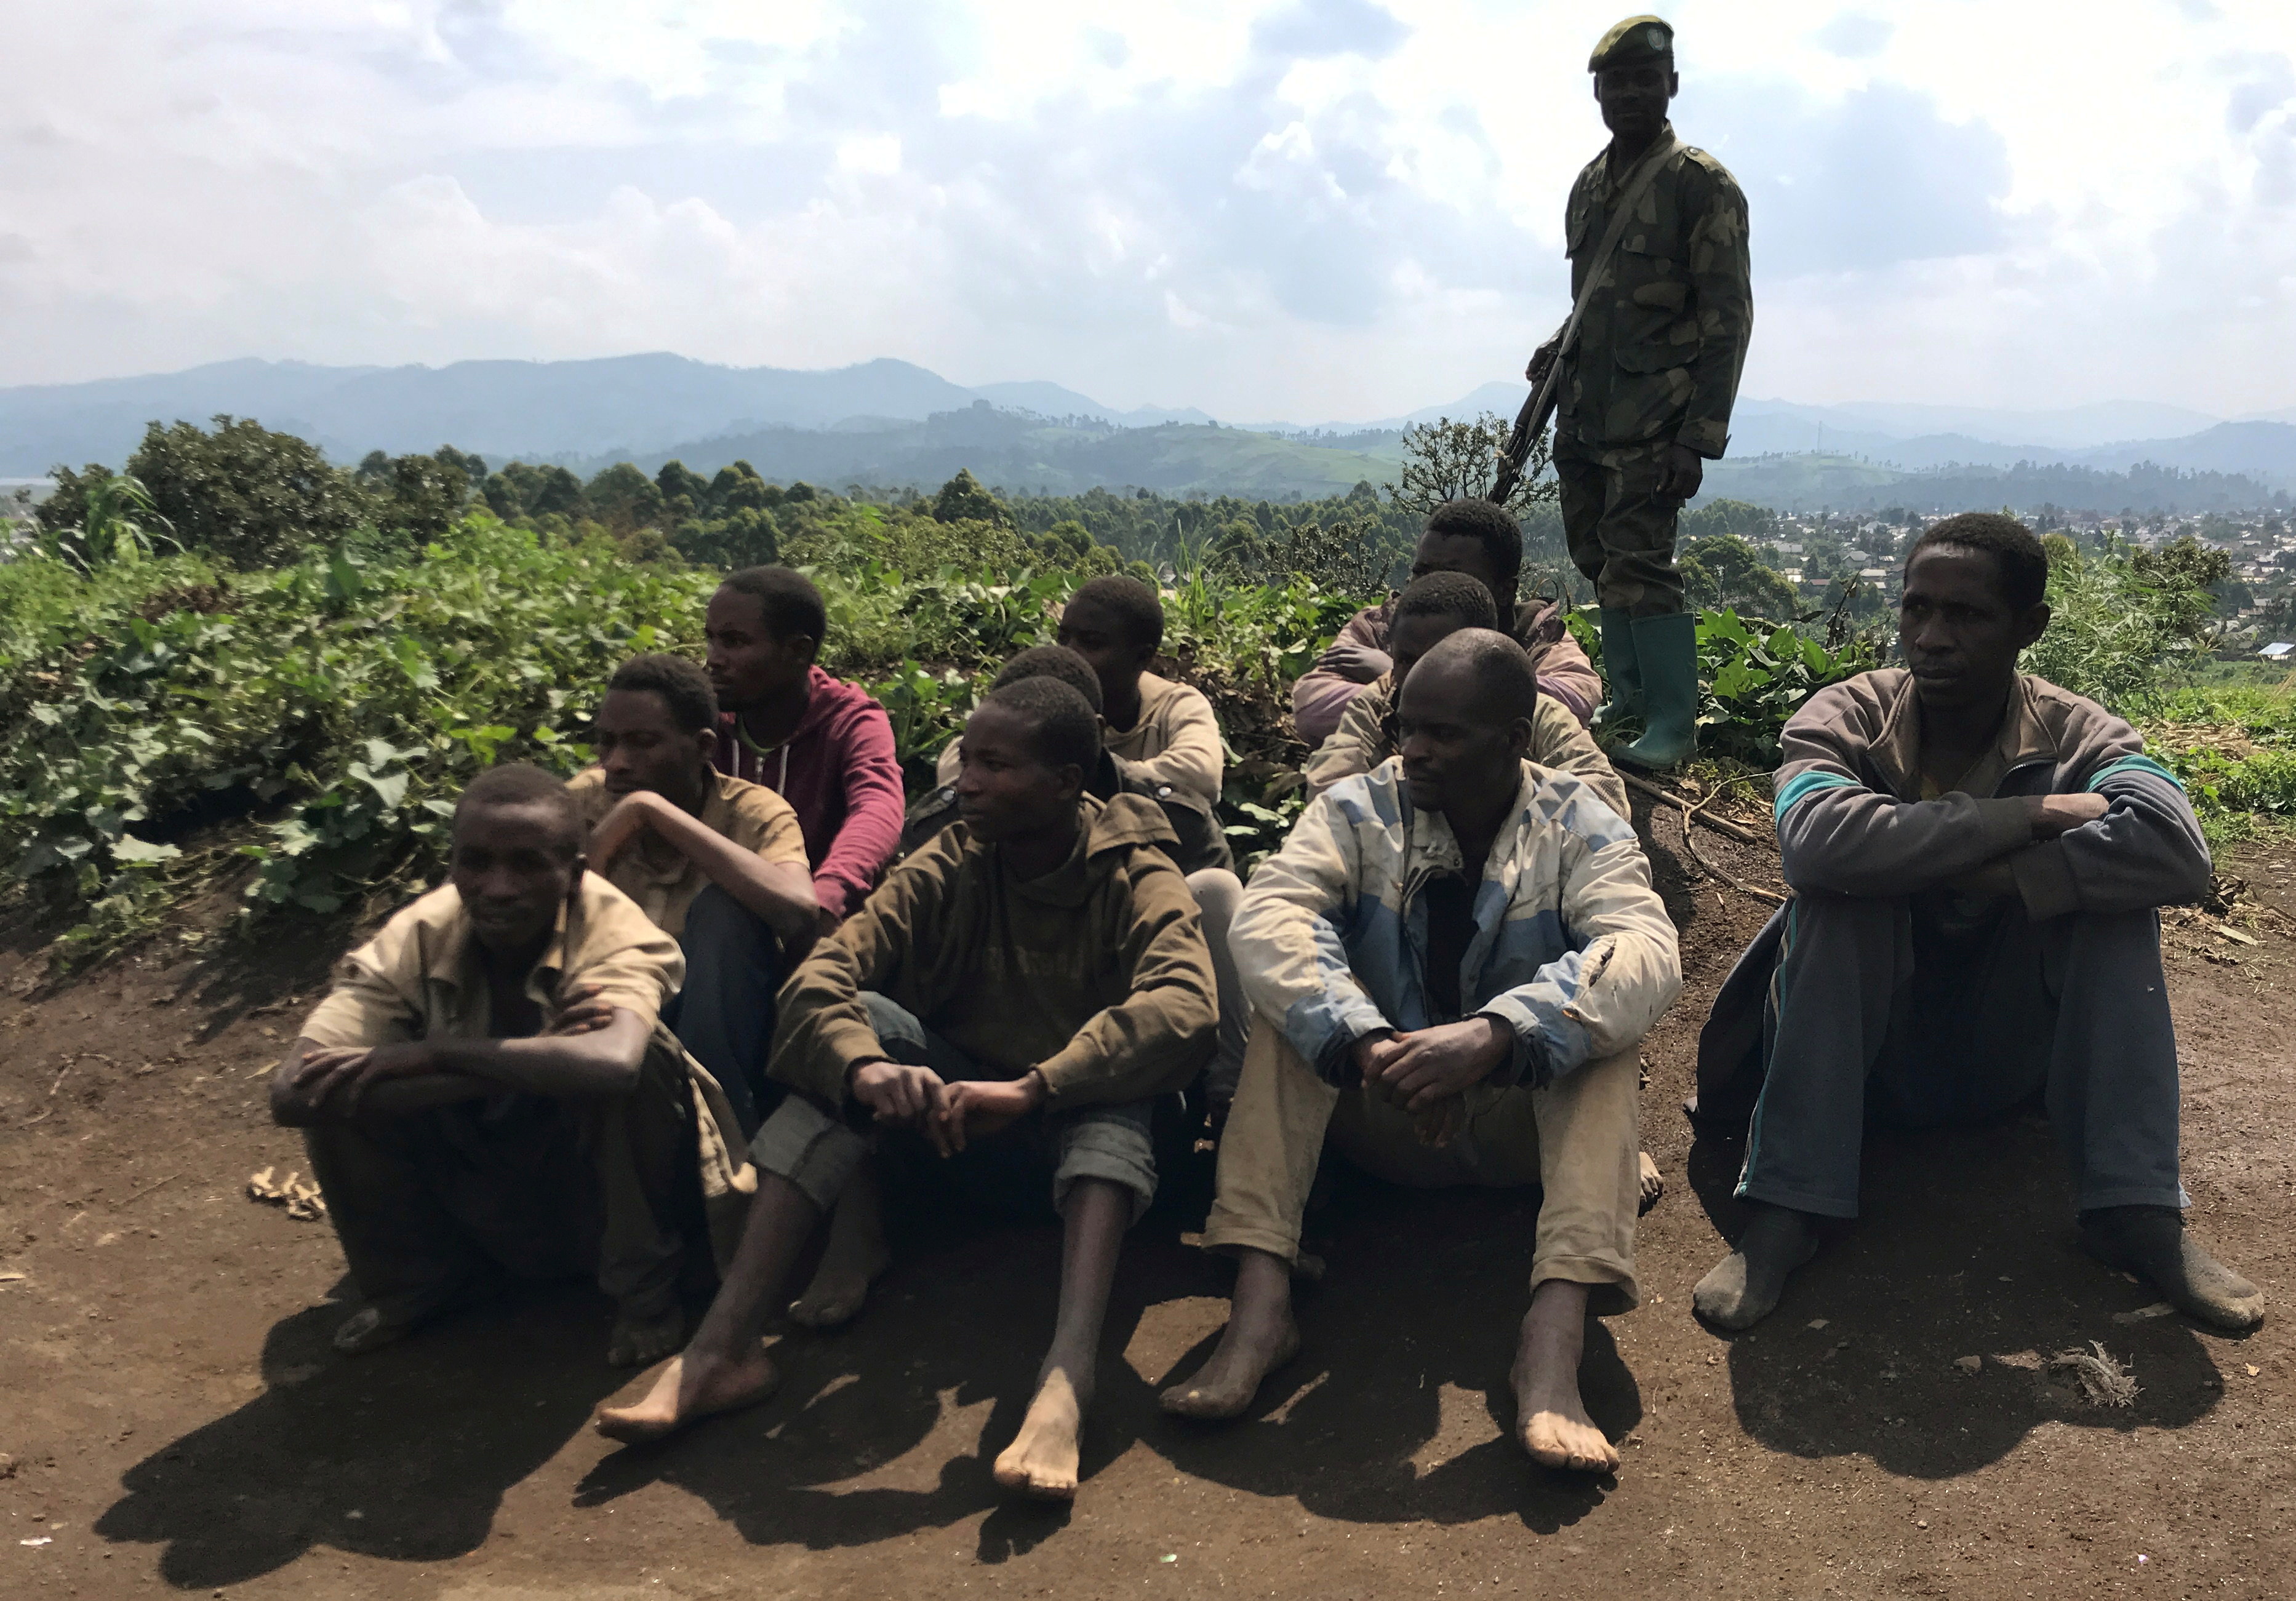 Congolese Mai-Mai rebels who surrendered their weapons to government officials sit guarded in Kitchanga, in the Masisi territory of North Kivu